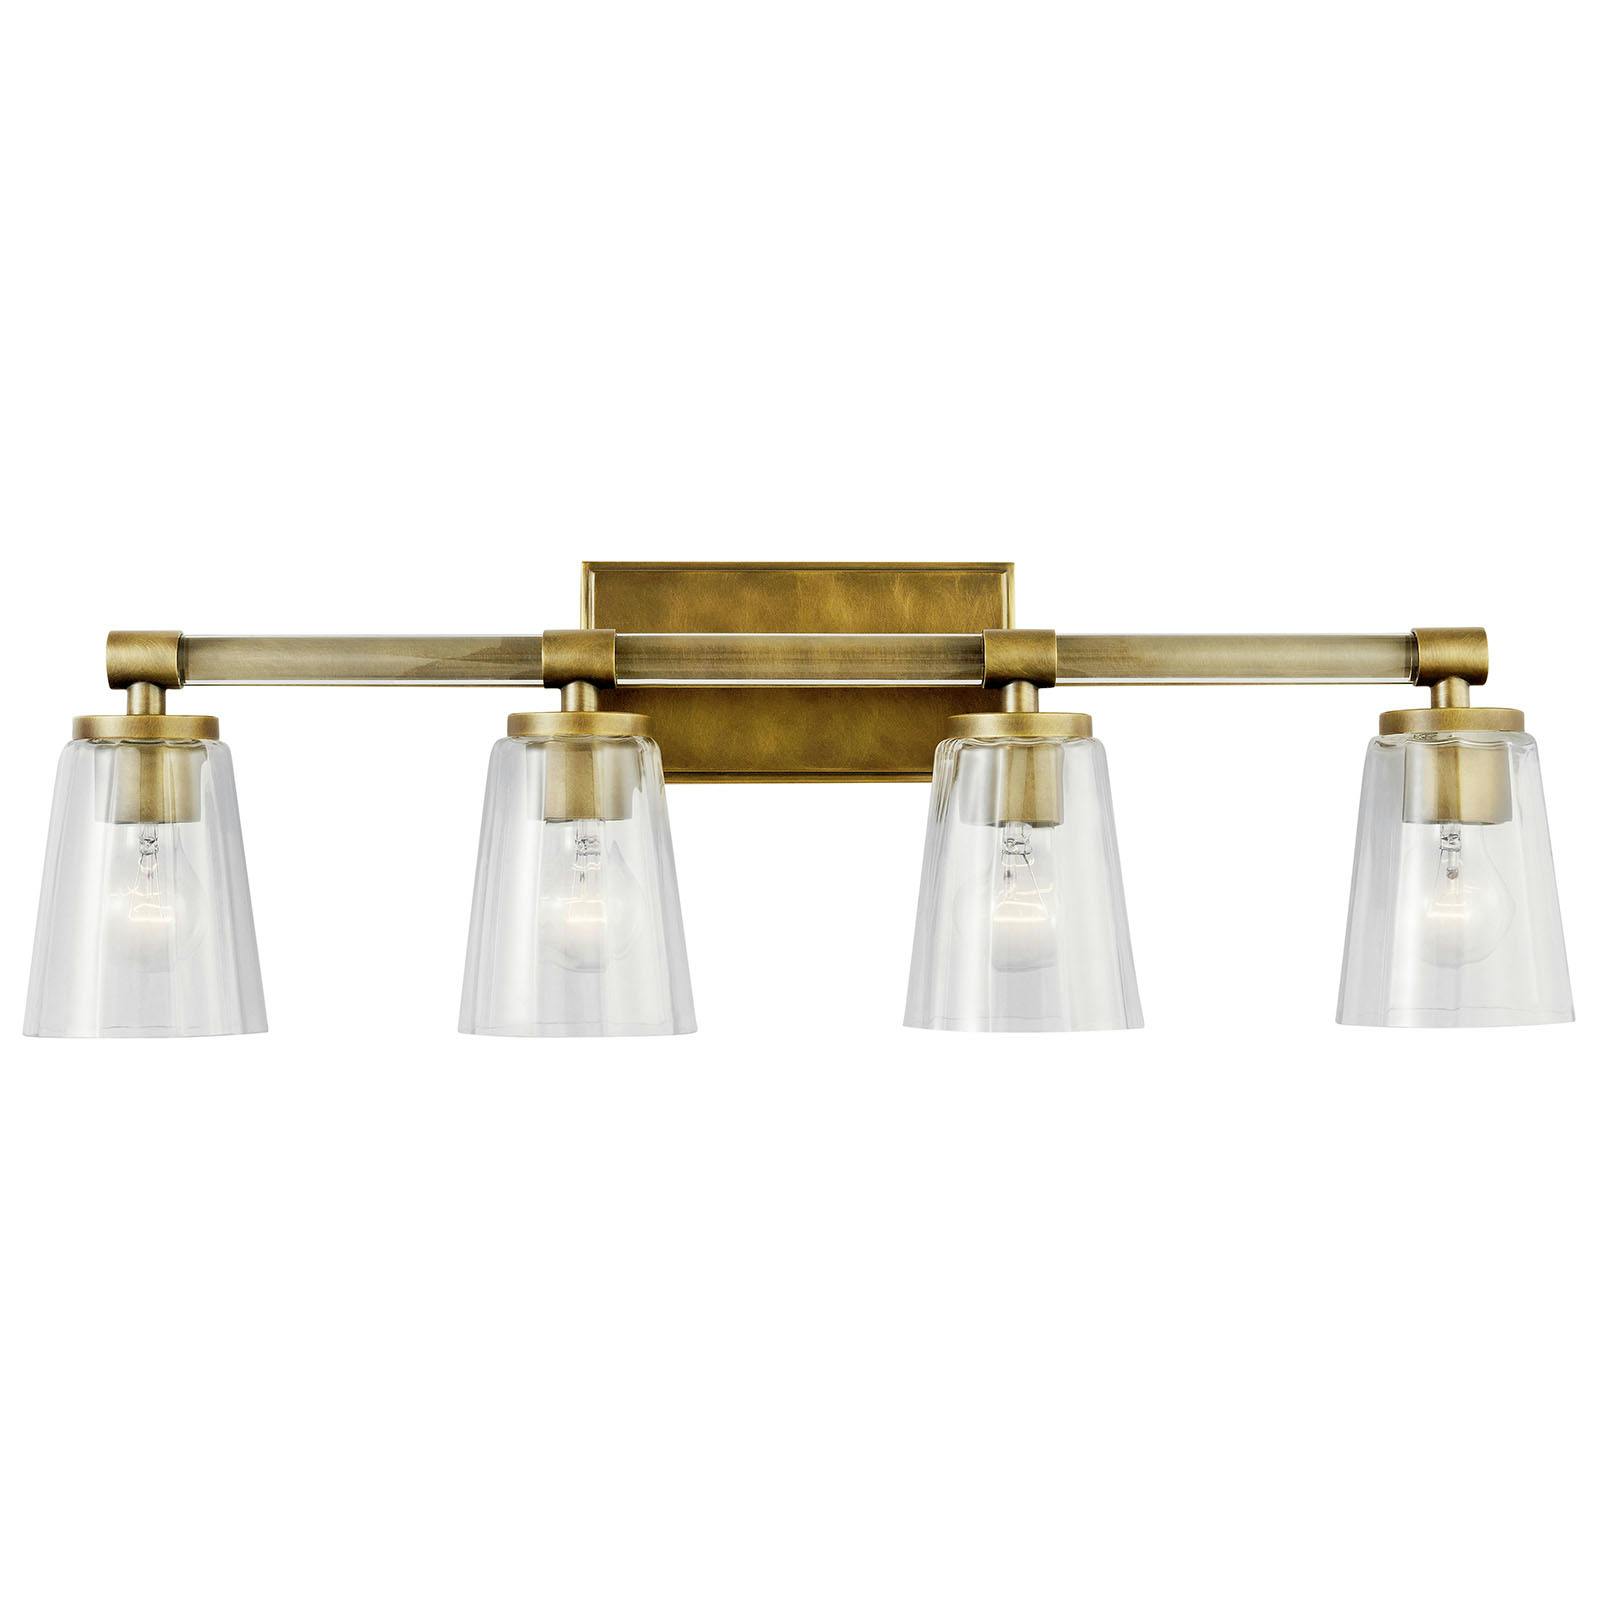 The Audrea 4 Light Vanity Light Natural Brass facing down on a white background